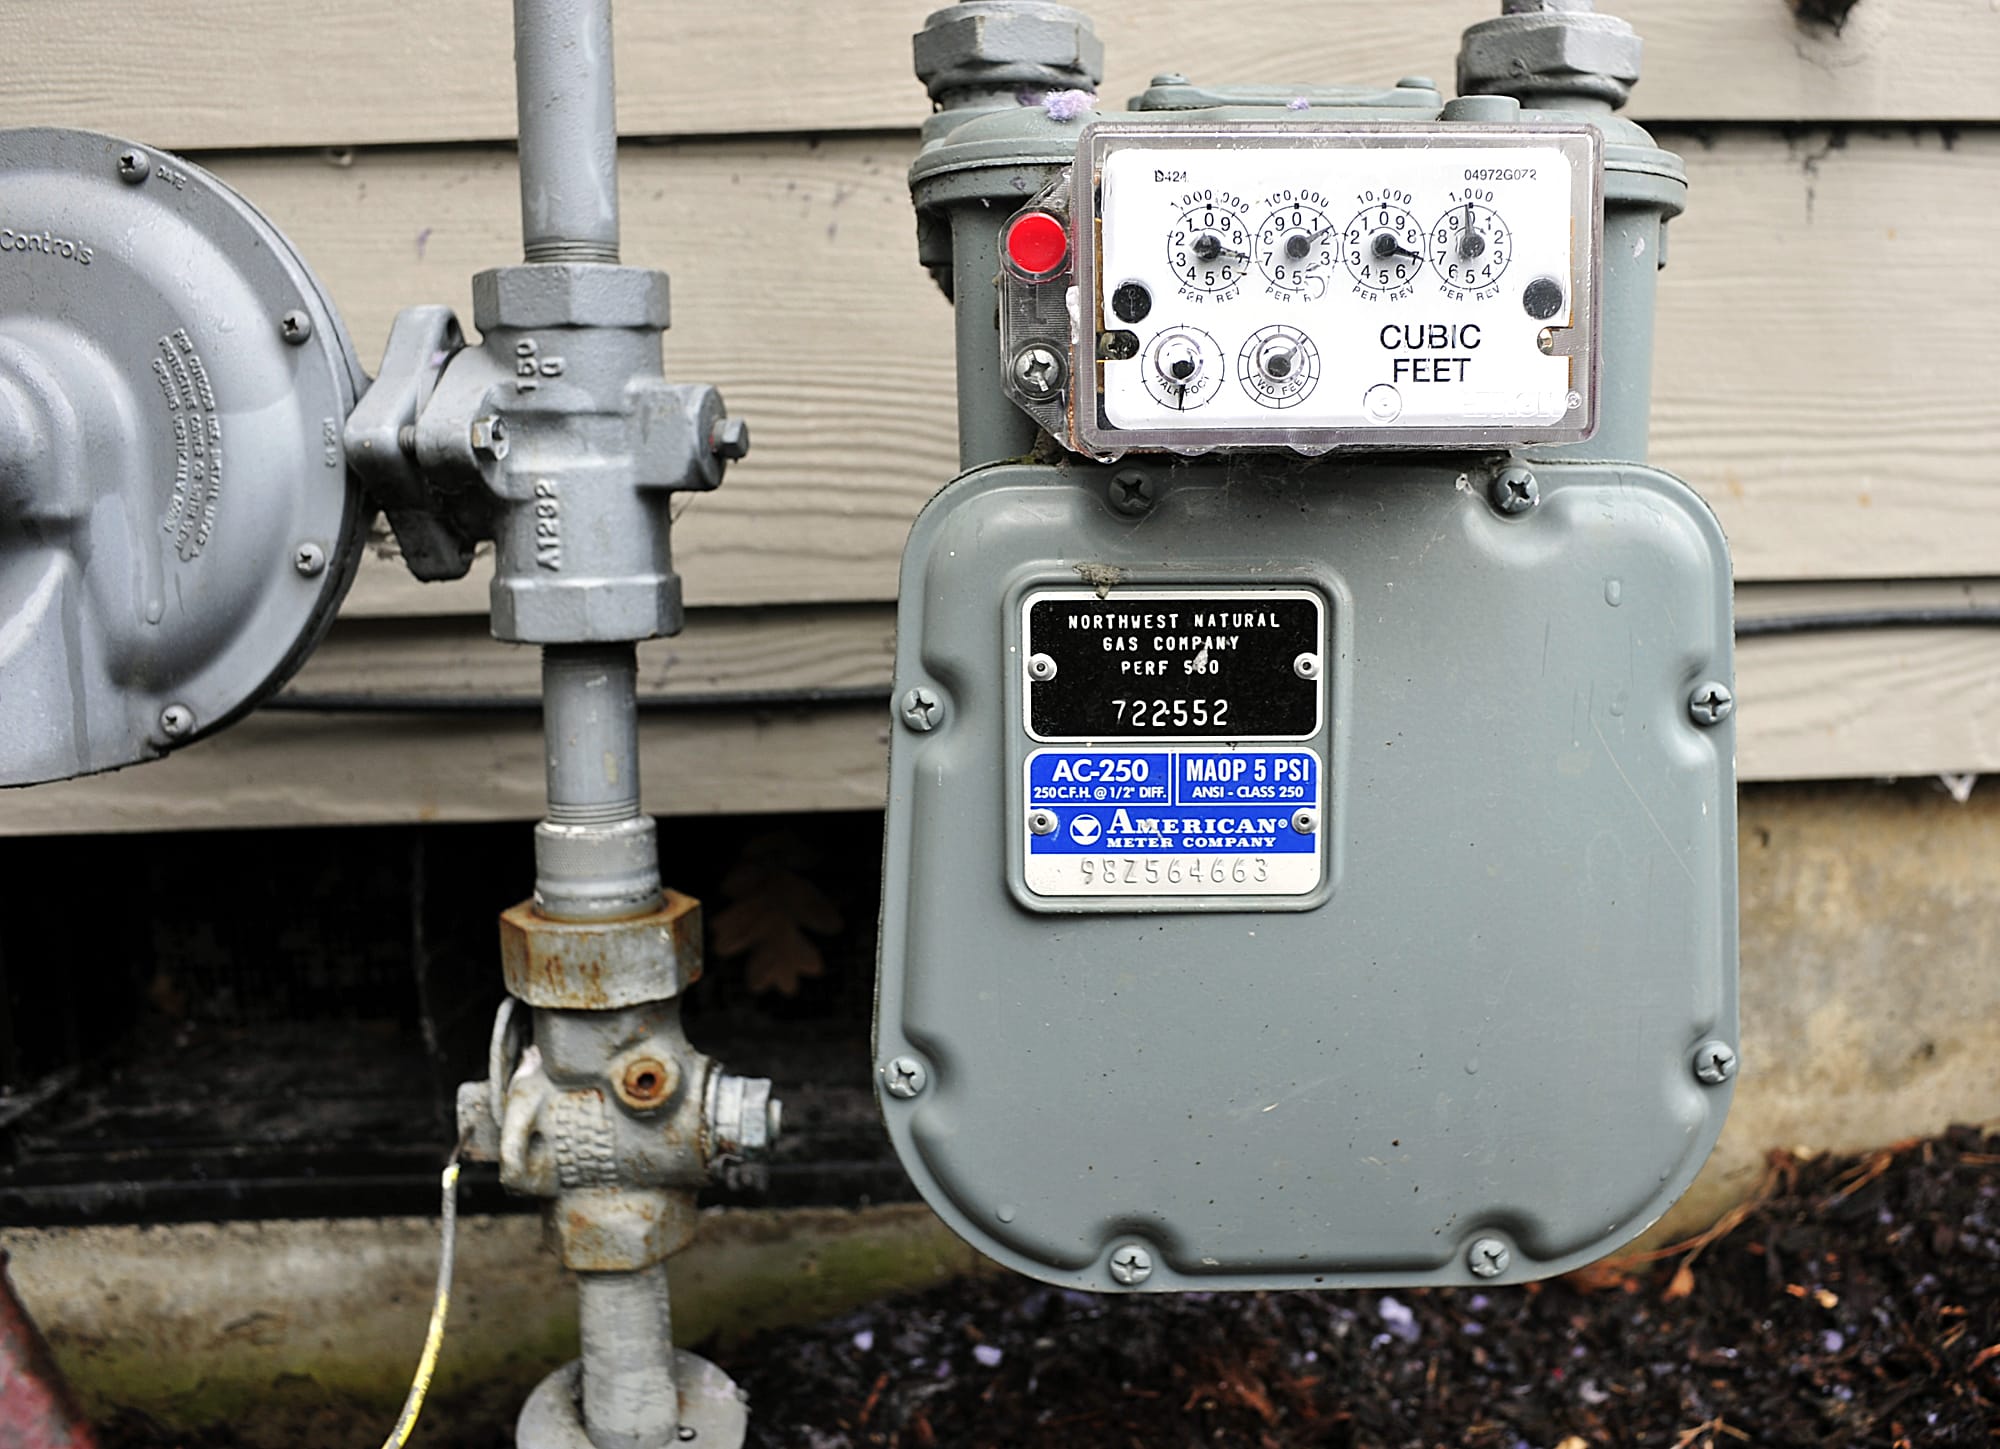 A NW Natural gas meter.